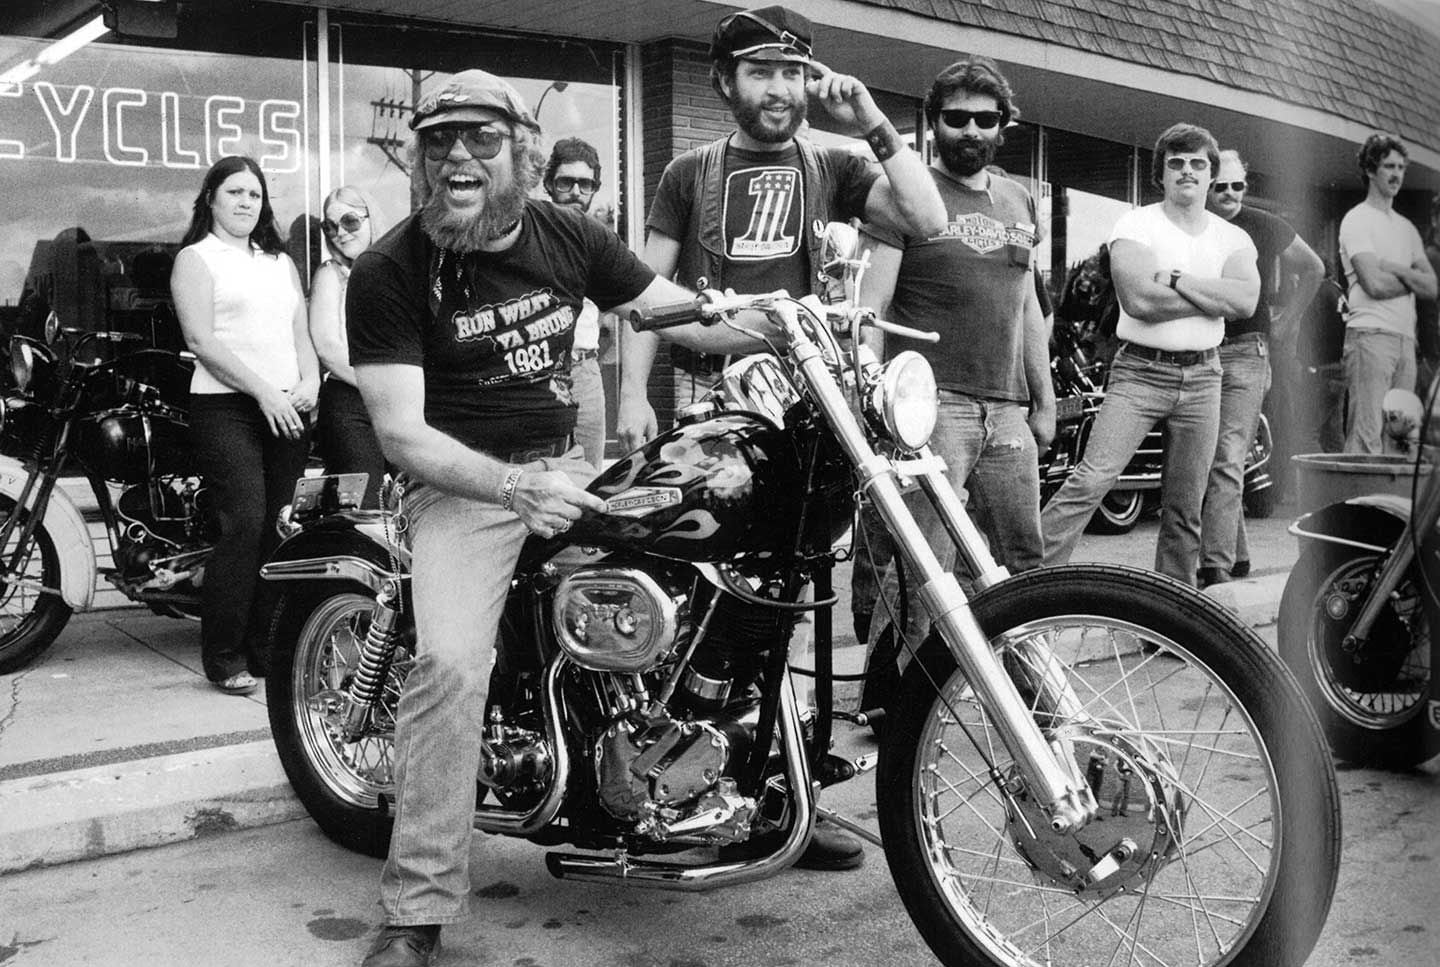 The event will honor Willie G., grandson of the co-founder of Harley-Davidson and an almost 50-year employee with the company.